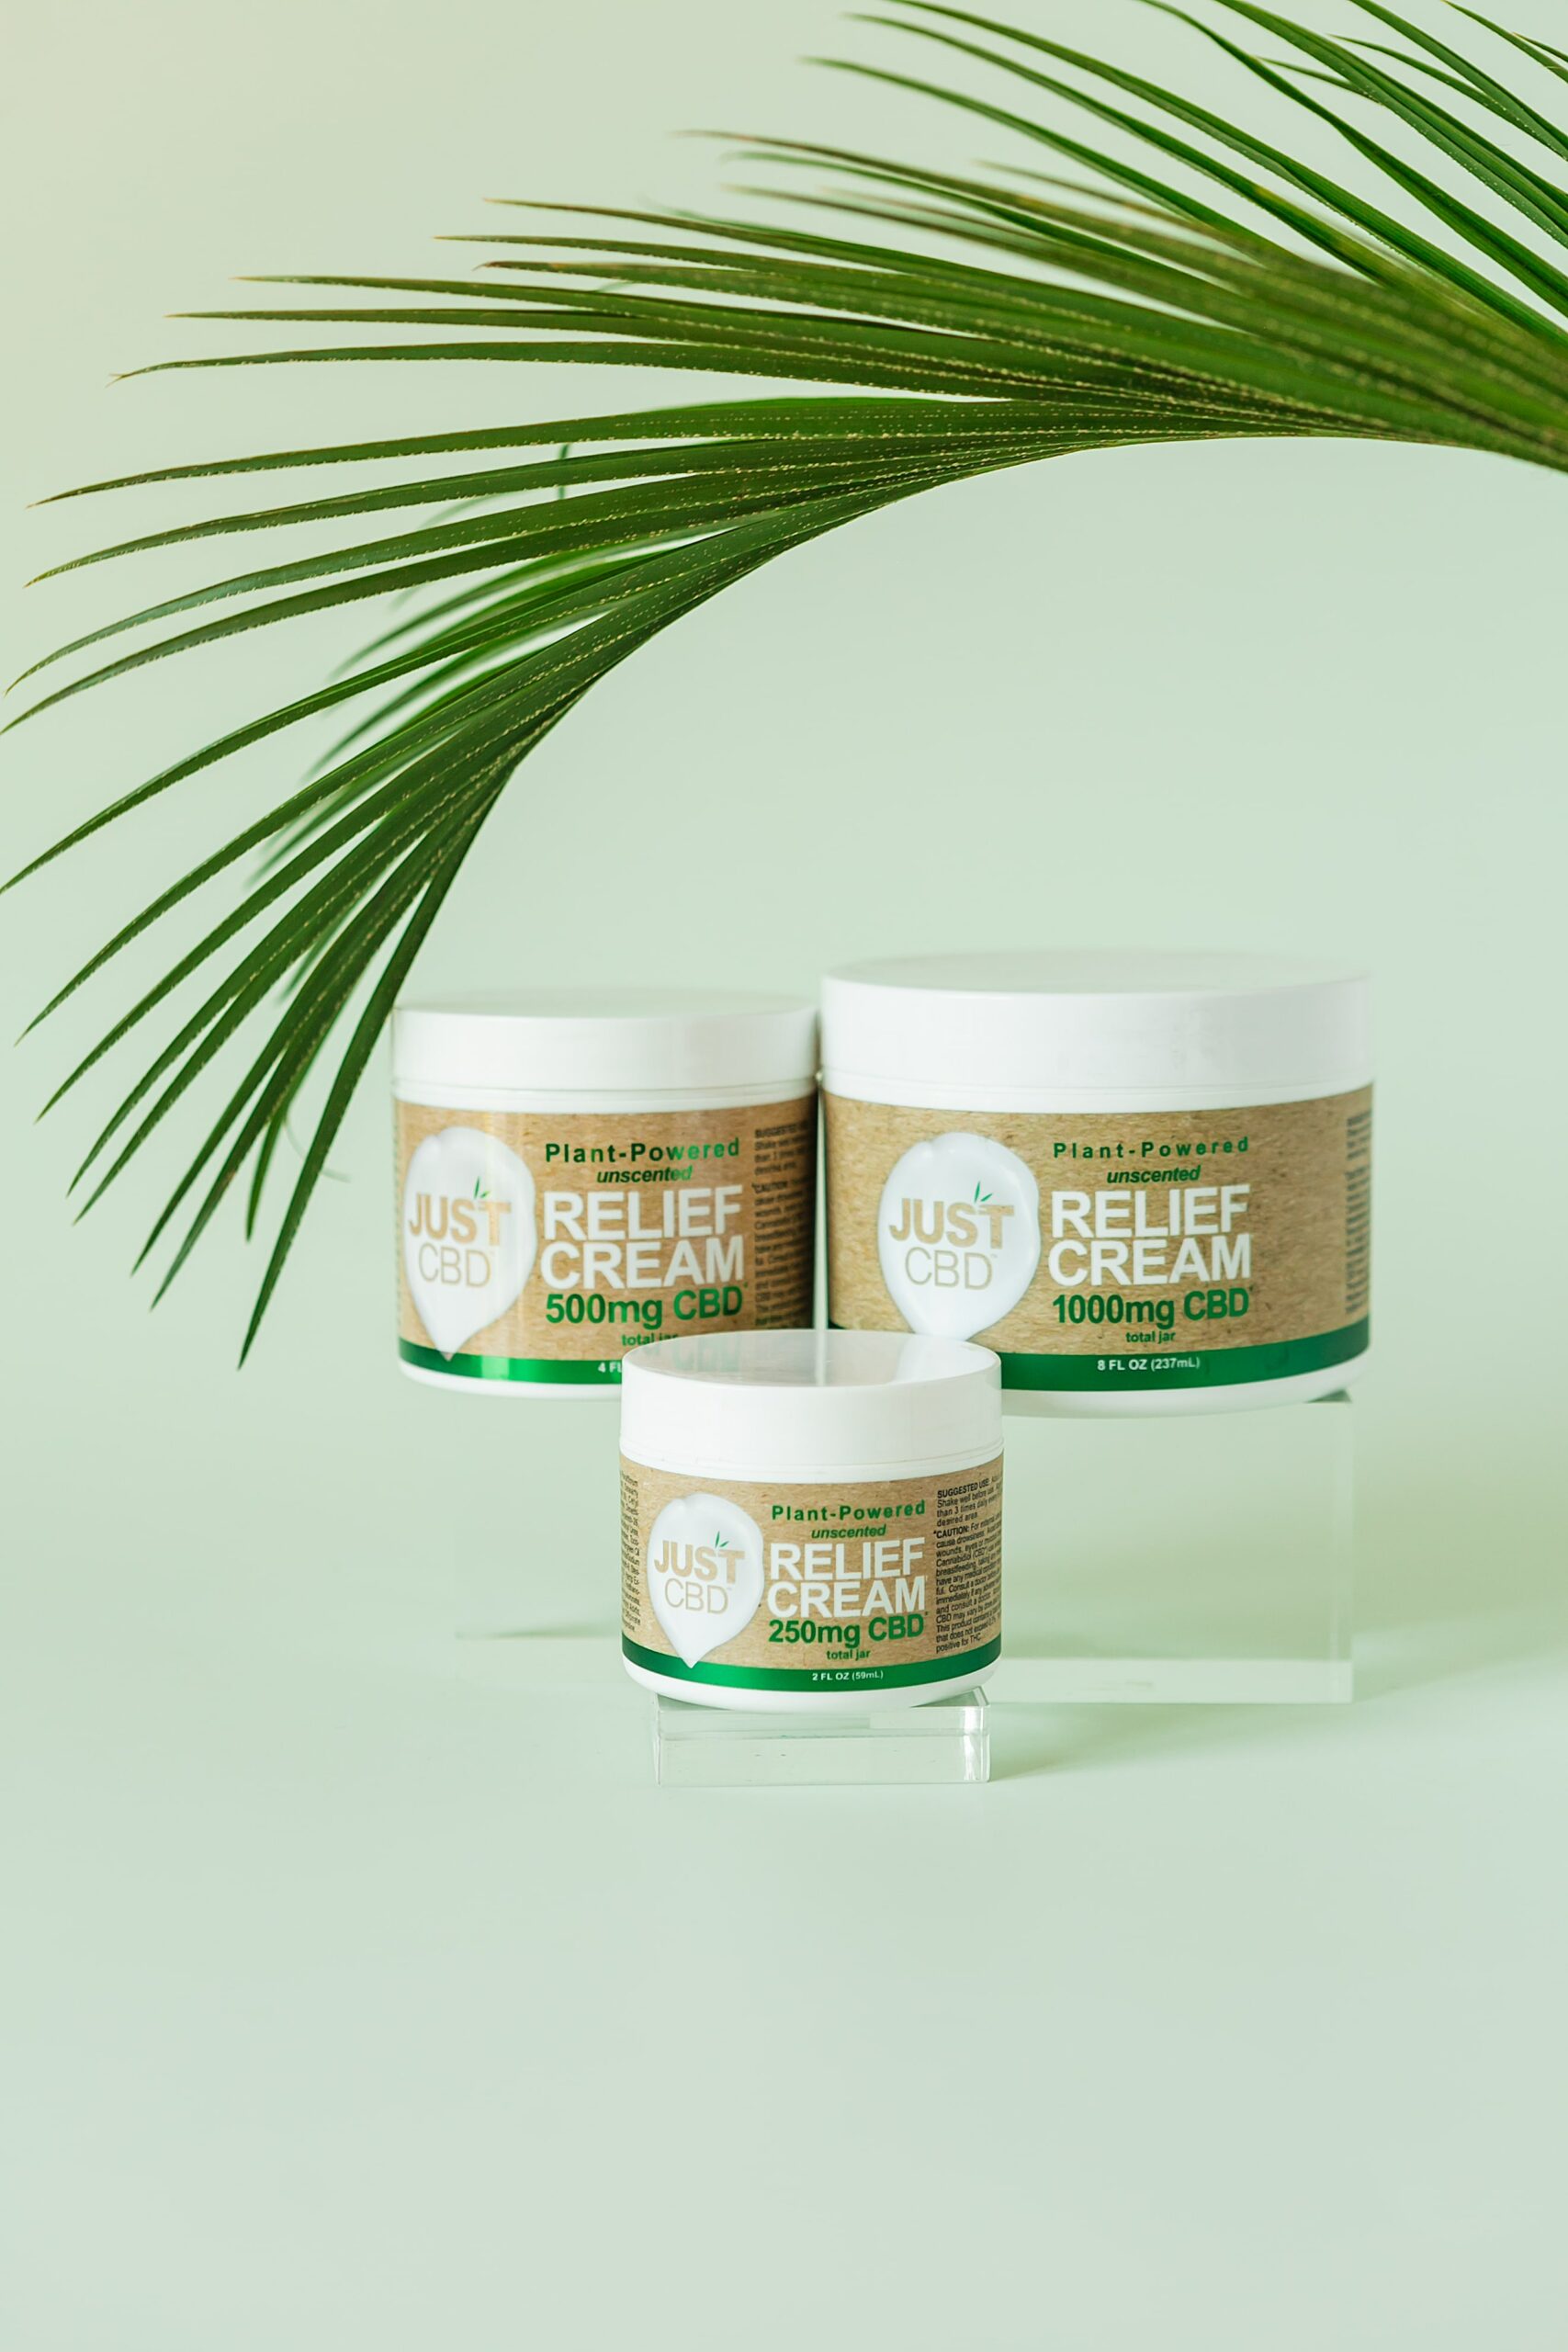 HOW TO SHOP FOR CBD CREAMS, BALMS, AND OTHER TOPICALS